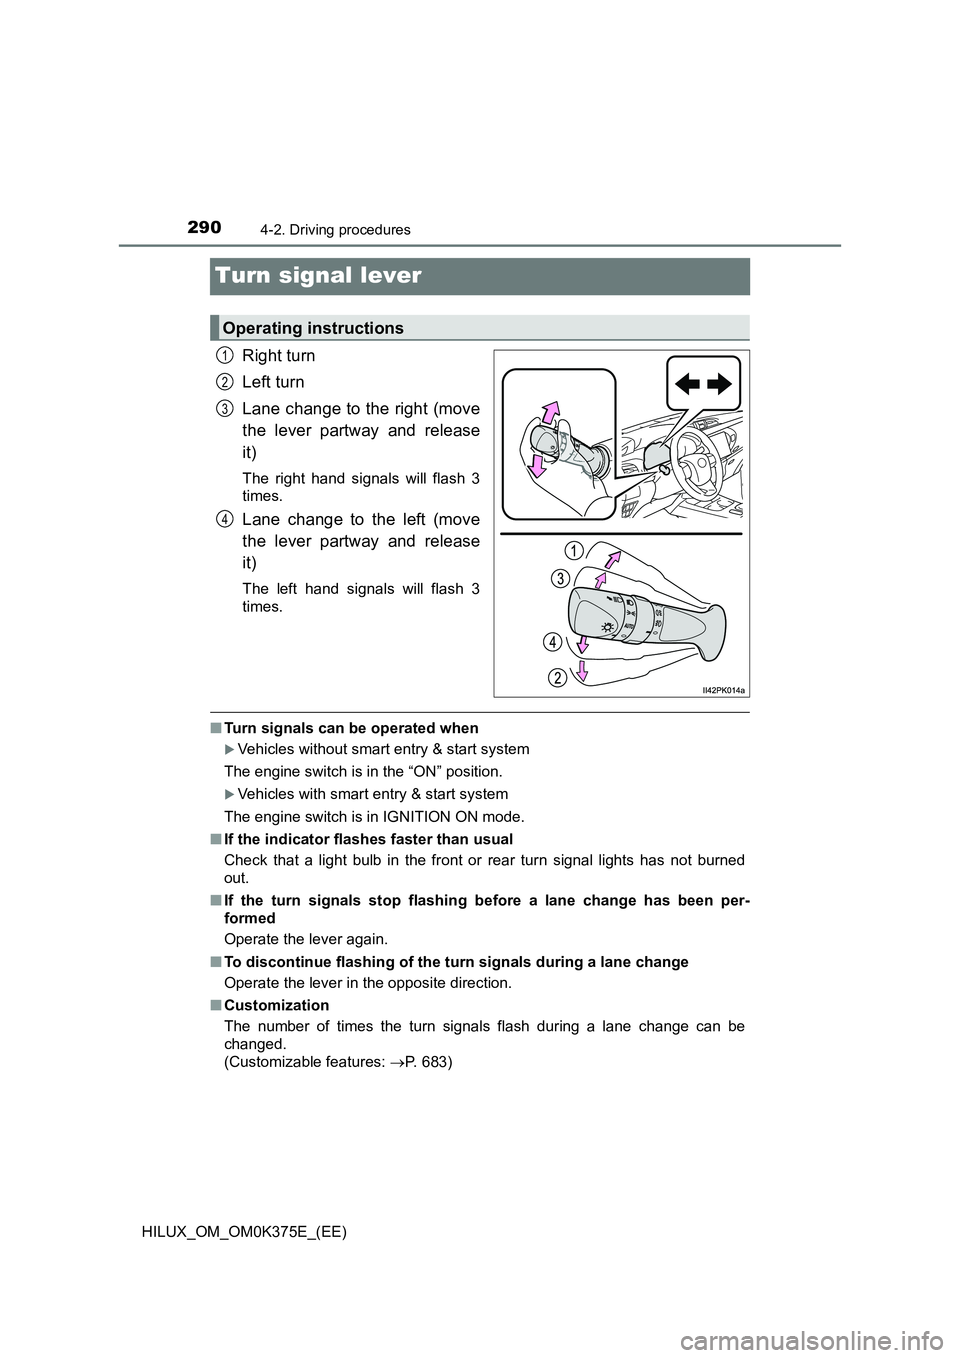 TOYOTA HILUX 2018  Owners Manual 2904-2. Driving procedures
HILUX_OM_OM0K375E_(EE)
Turn signal lever
Right turn 
Left turn 
Lane change to the right (move 
the lever partway and release 
it)
The right hand signals will flash 3 
times